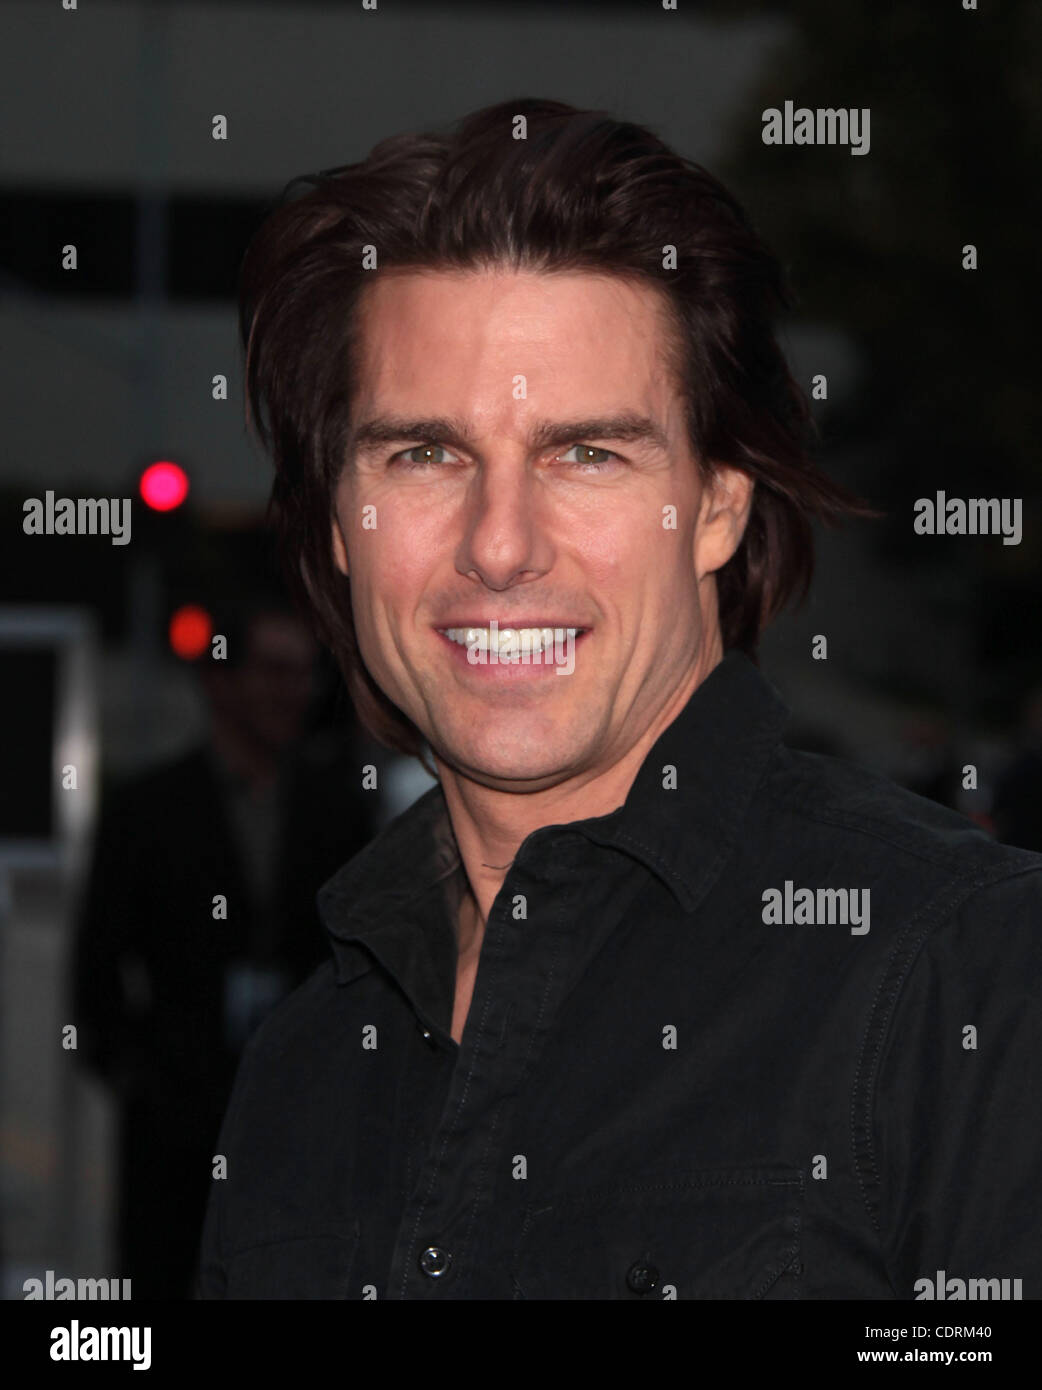 June 8, 2011 - Westwood, California, U.S. - TOM CRUISE arrives for the premiere of the film 'Super 8' at the Regency Village theater. (Credit Image: © Lisa O'Connor/ZUMAPRESS.com) Stock Photo